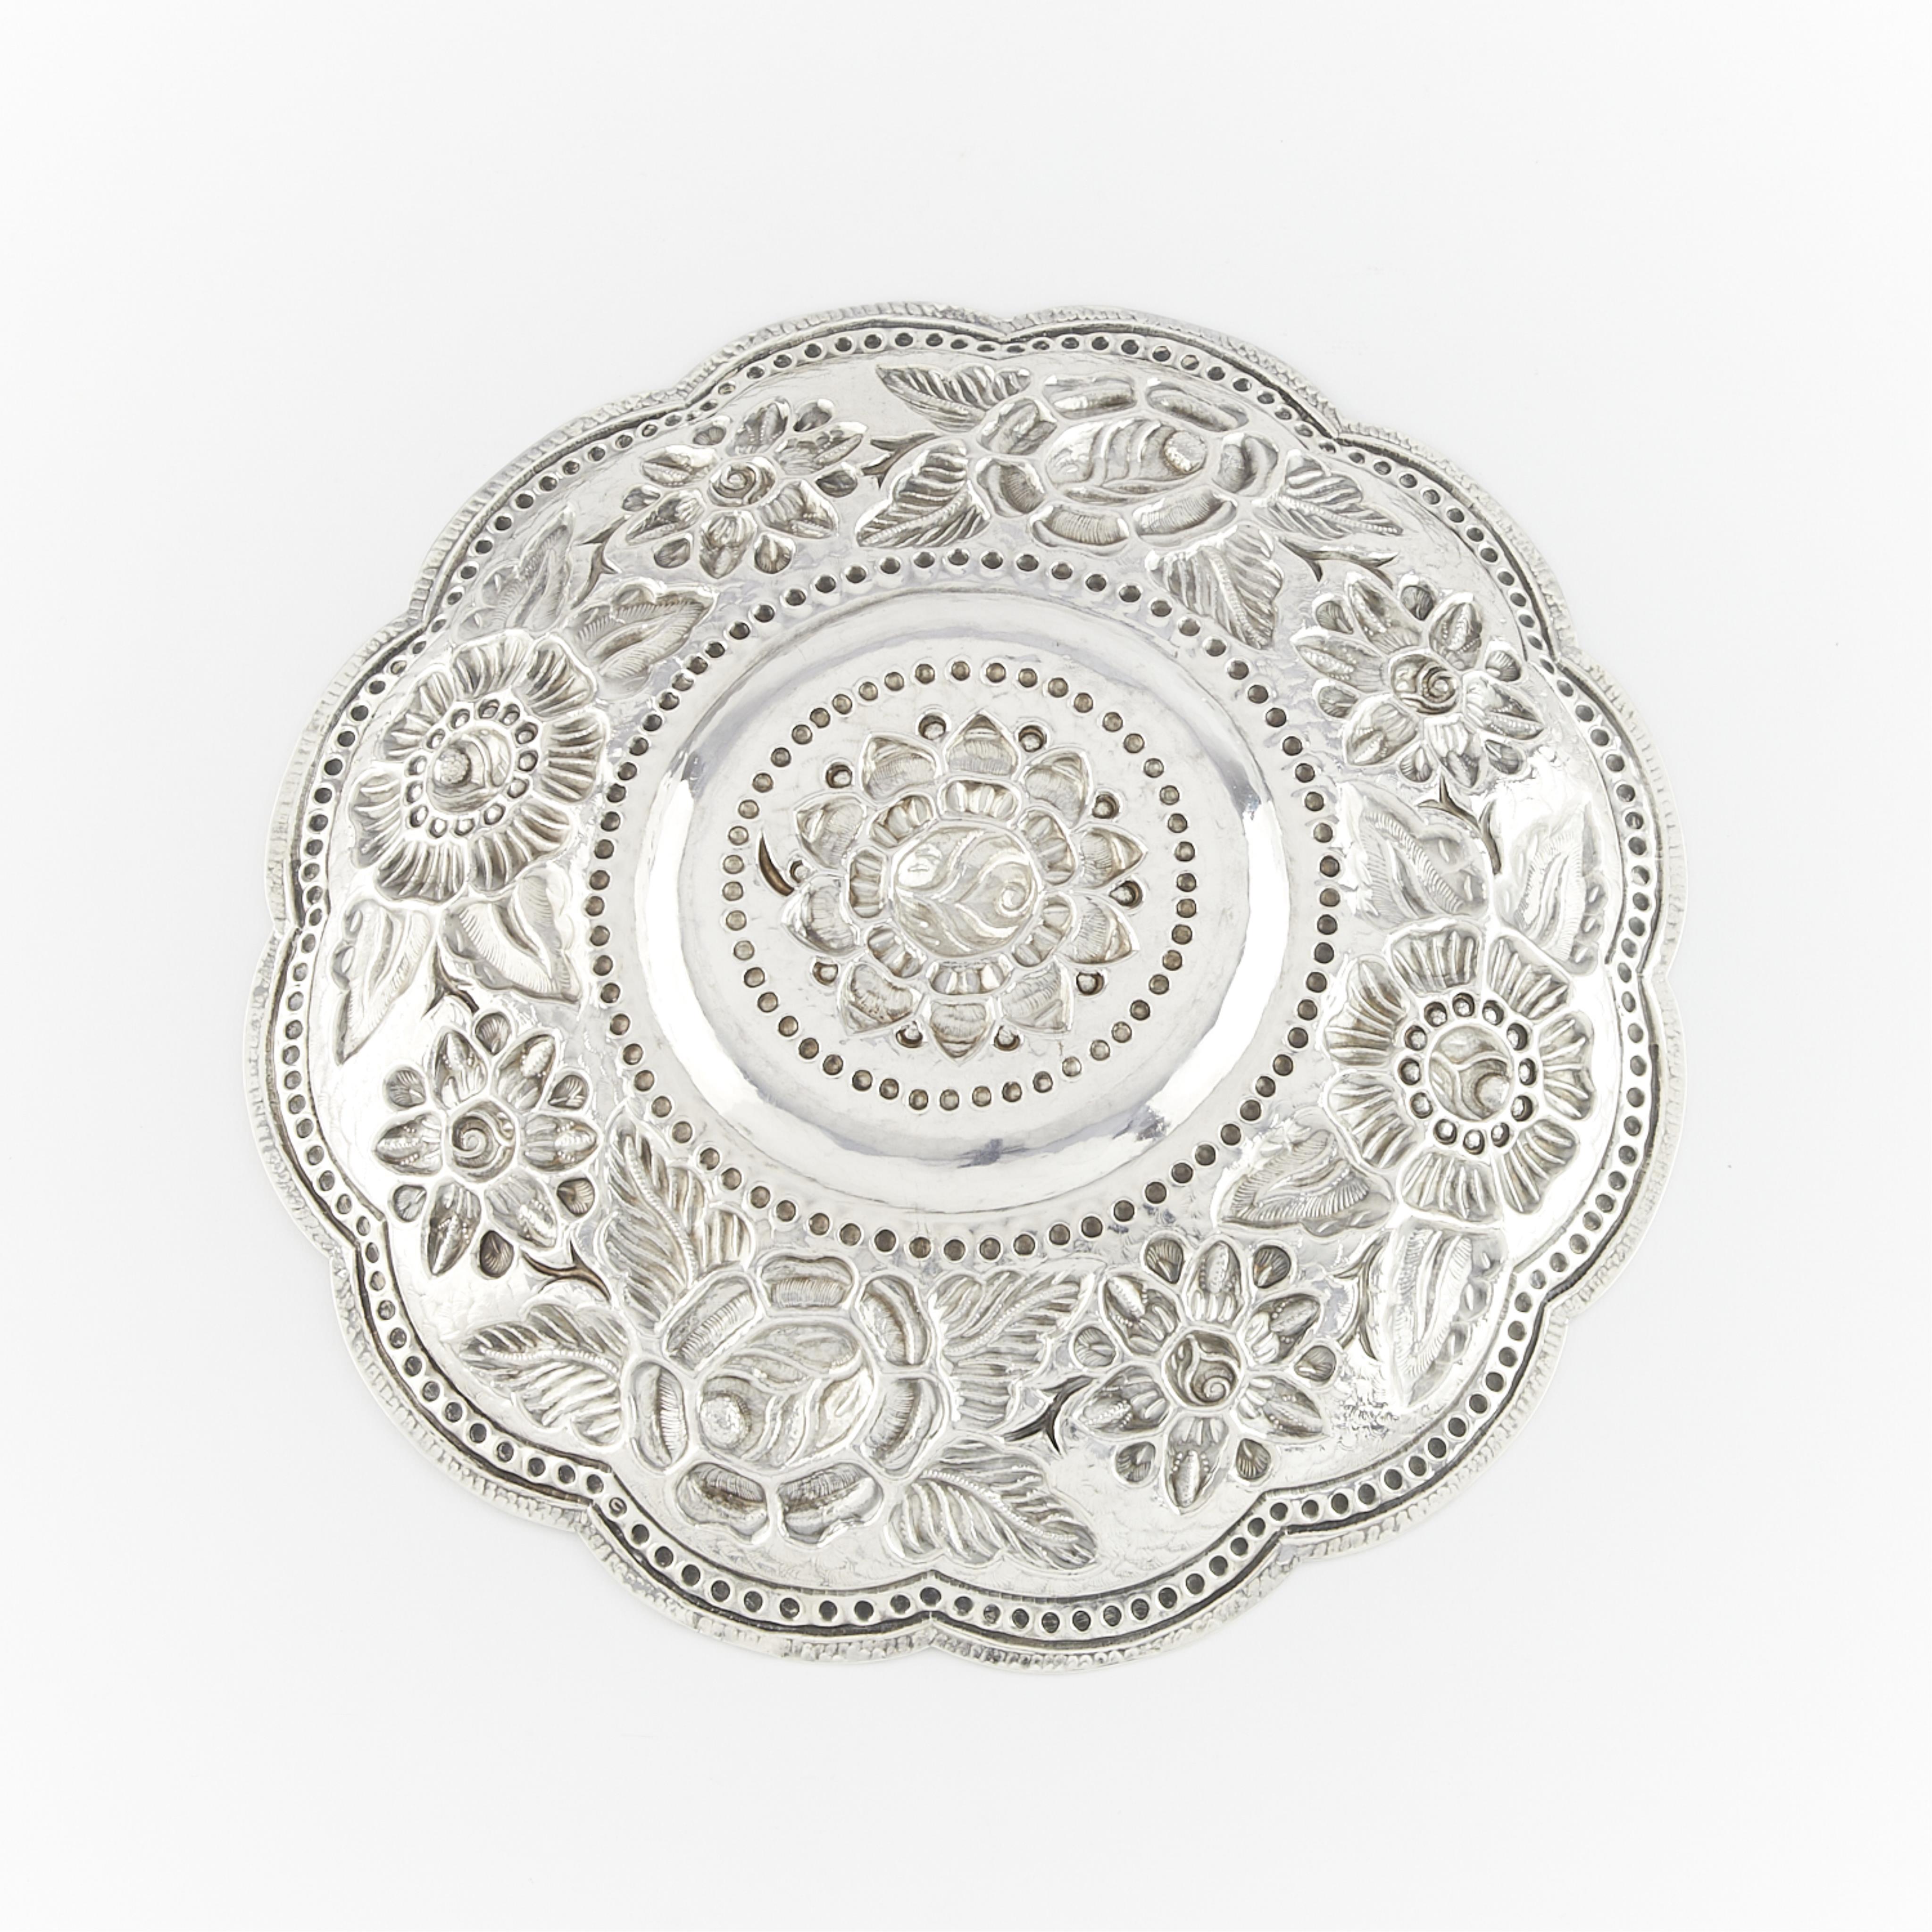 Sterling Silver Colonial Platter 13.79 ozt - Image 3 of 5